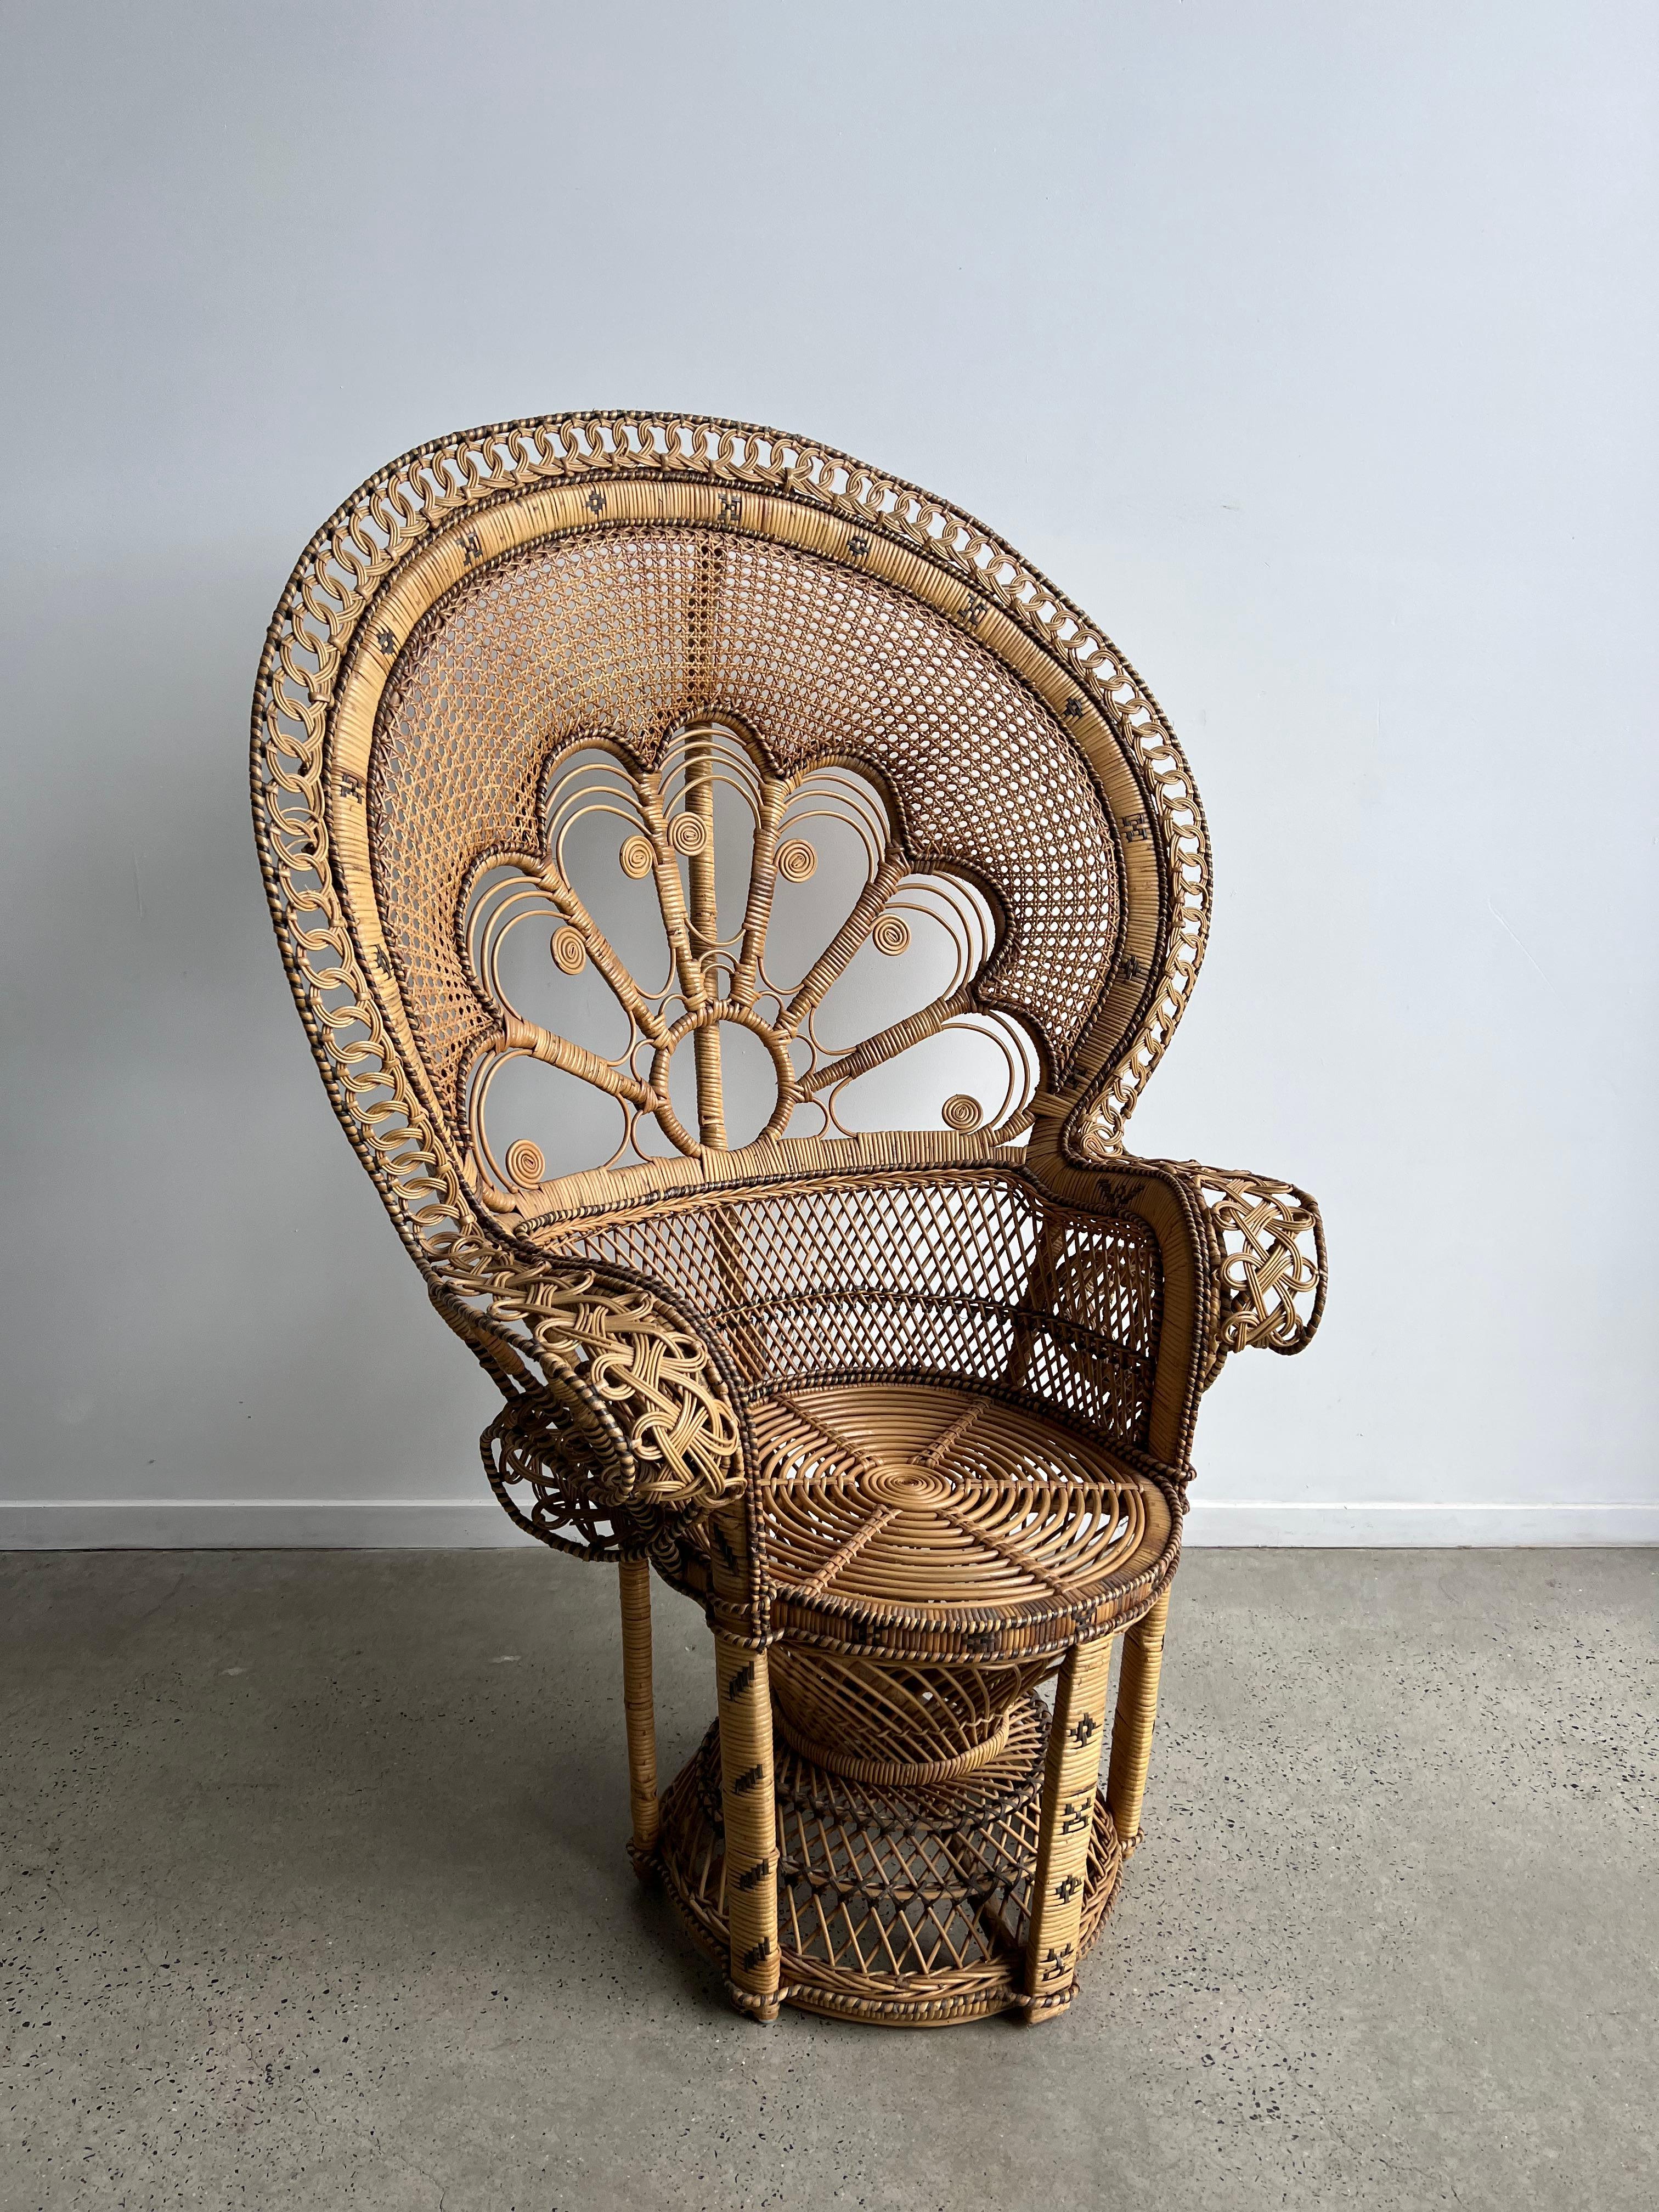 Gorgeous Bohemian-styled peacock chairs made out of woven rattan and wicker. The back features intricate woven detailing, circa 1970s.
The chair features expertly woven wicker and cane with a large-scale fan back, portraying a peacock’s splayed